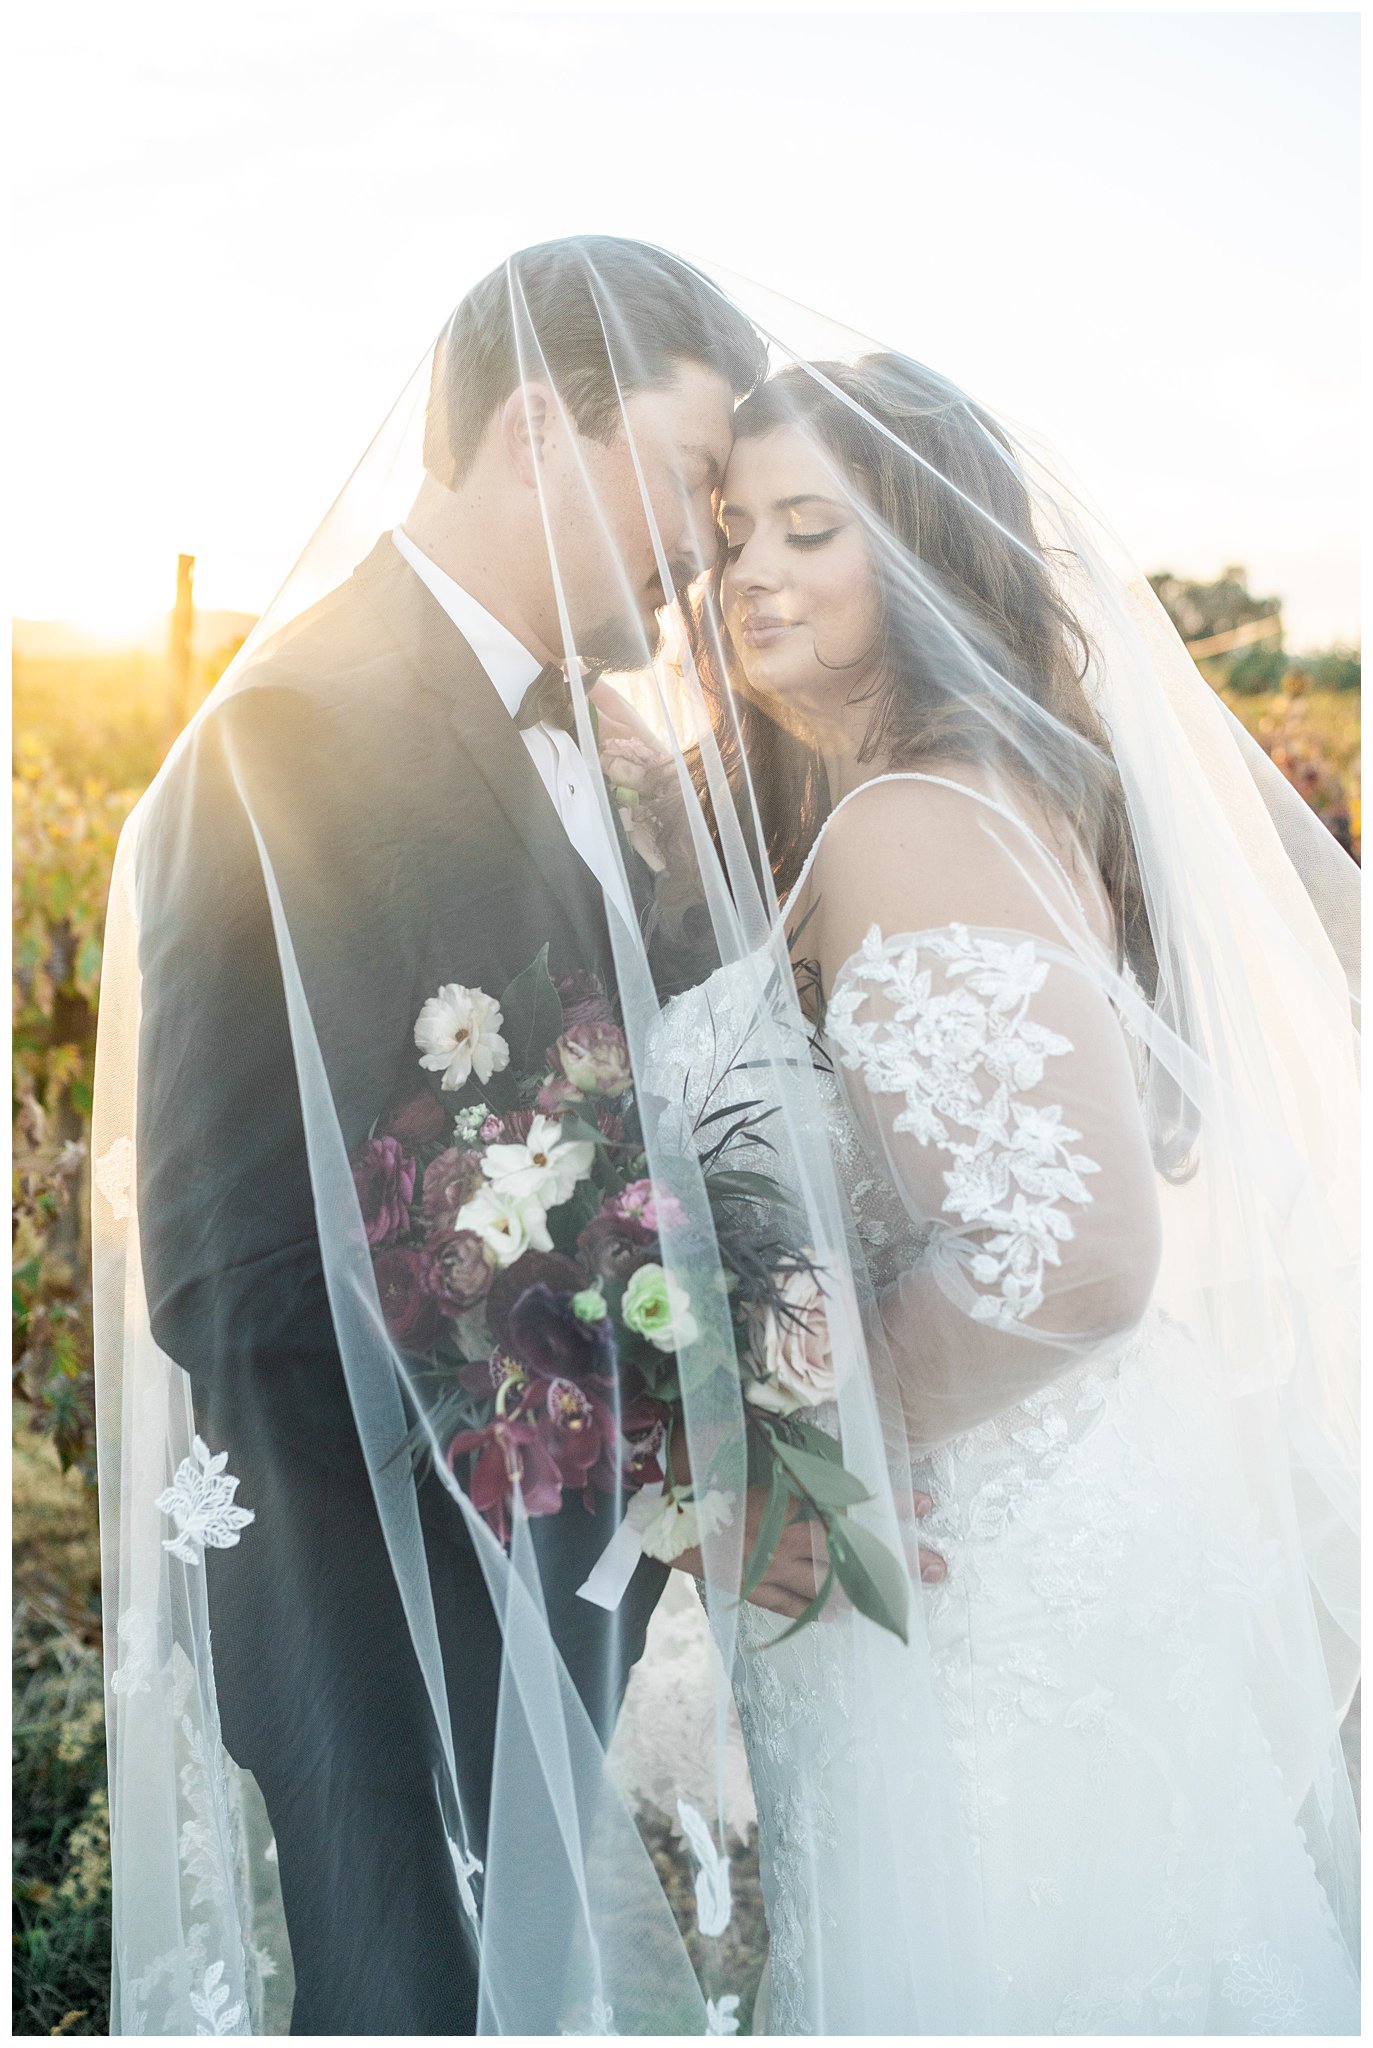 Paso Robles is the perfect destination location for a luxury Vineyard wedding day in California.